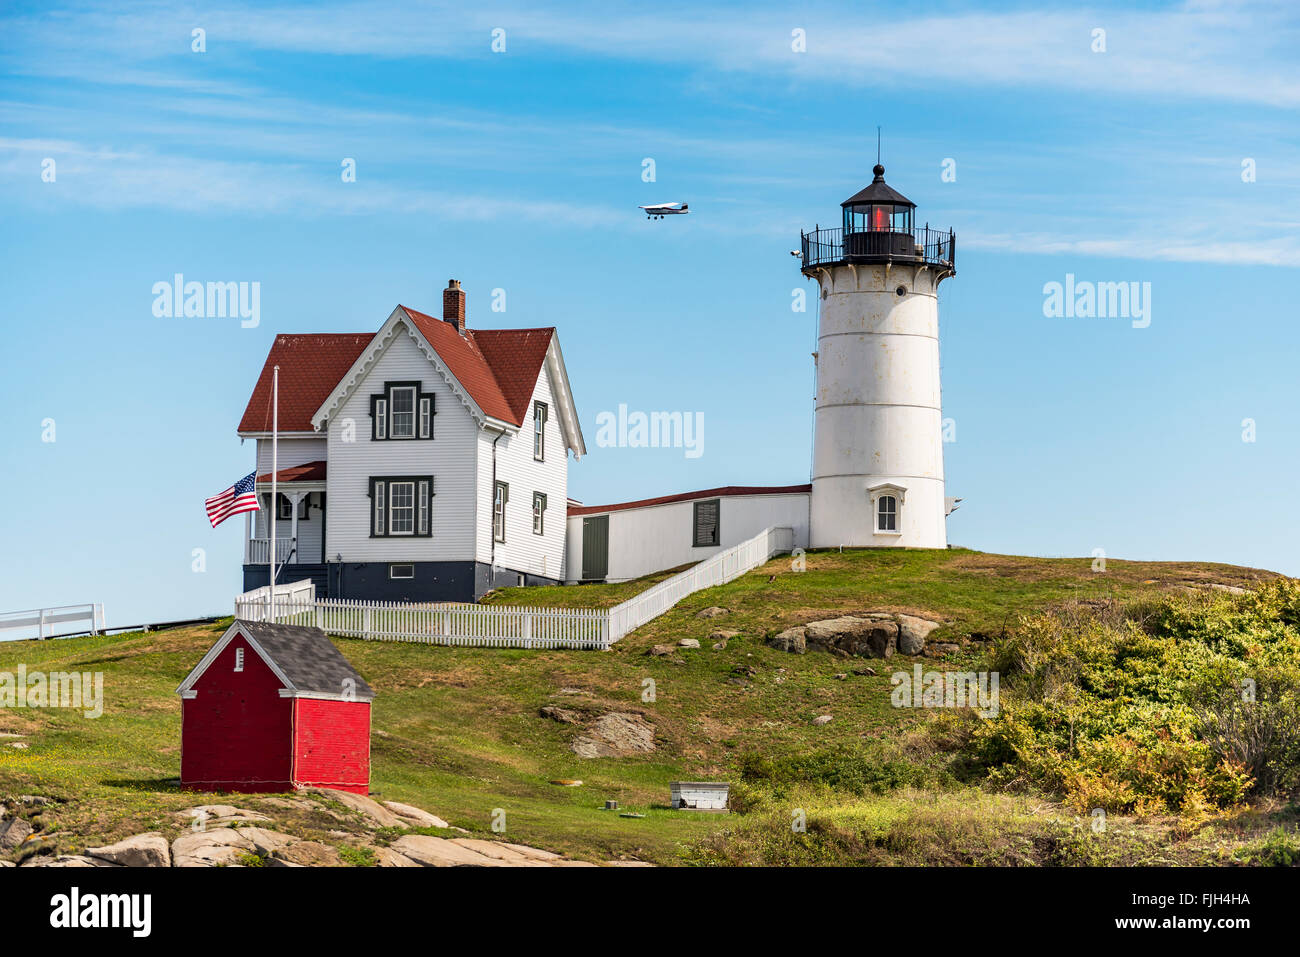 Cape Neddick Lighthouse at old village of York in Maine, USA Stock Photo